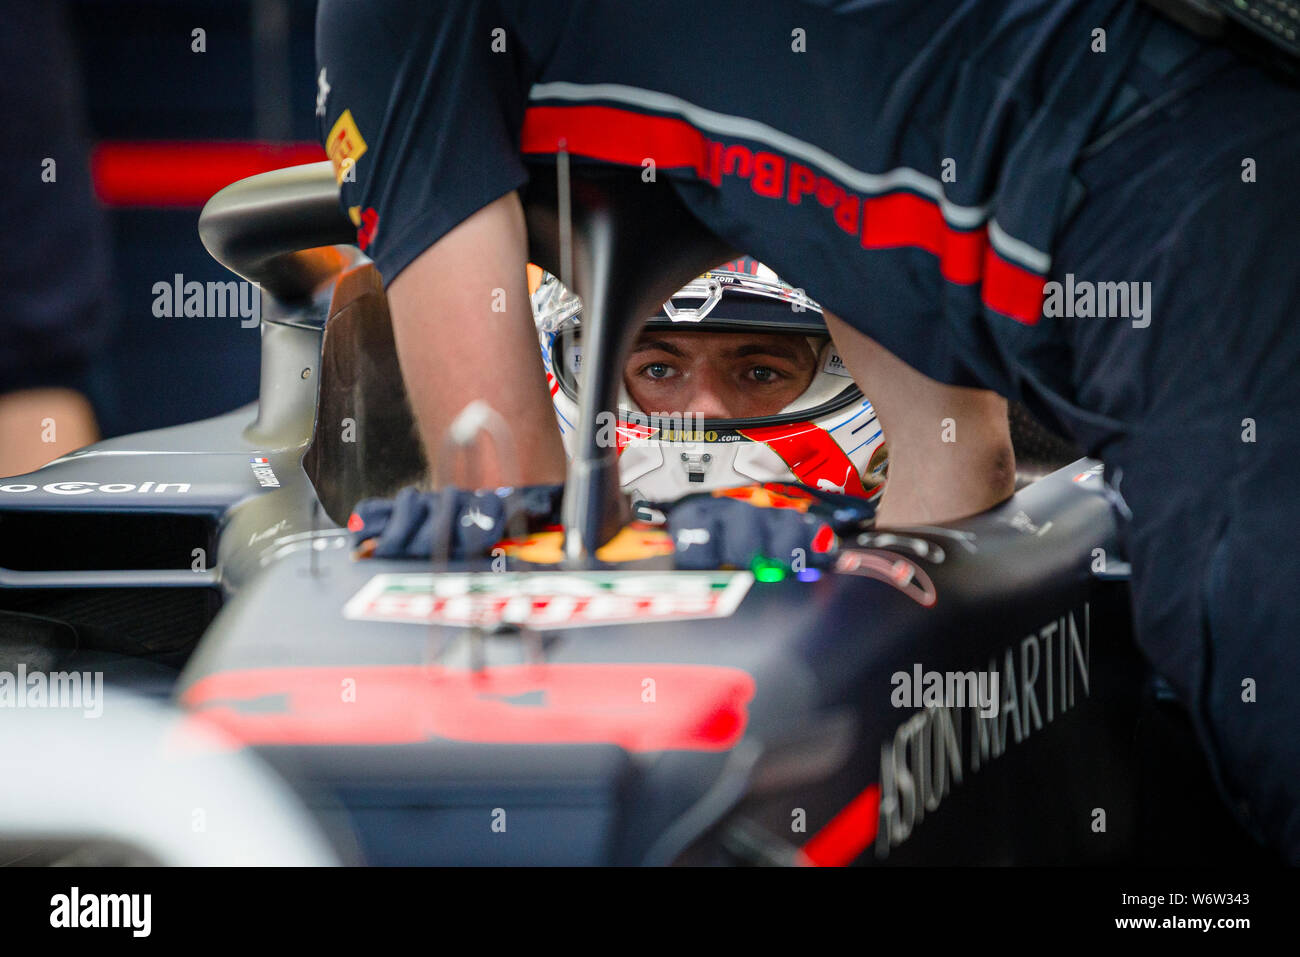 Red Bull Racing’s Dutch driver Max Verstappen seats in his car during the second practice session of the Hungarian F1 Grand Prix. Stock Photo